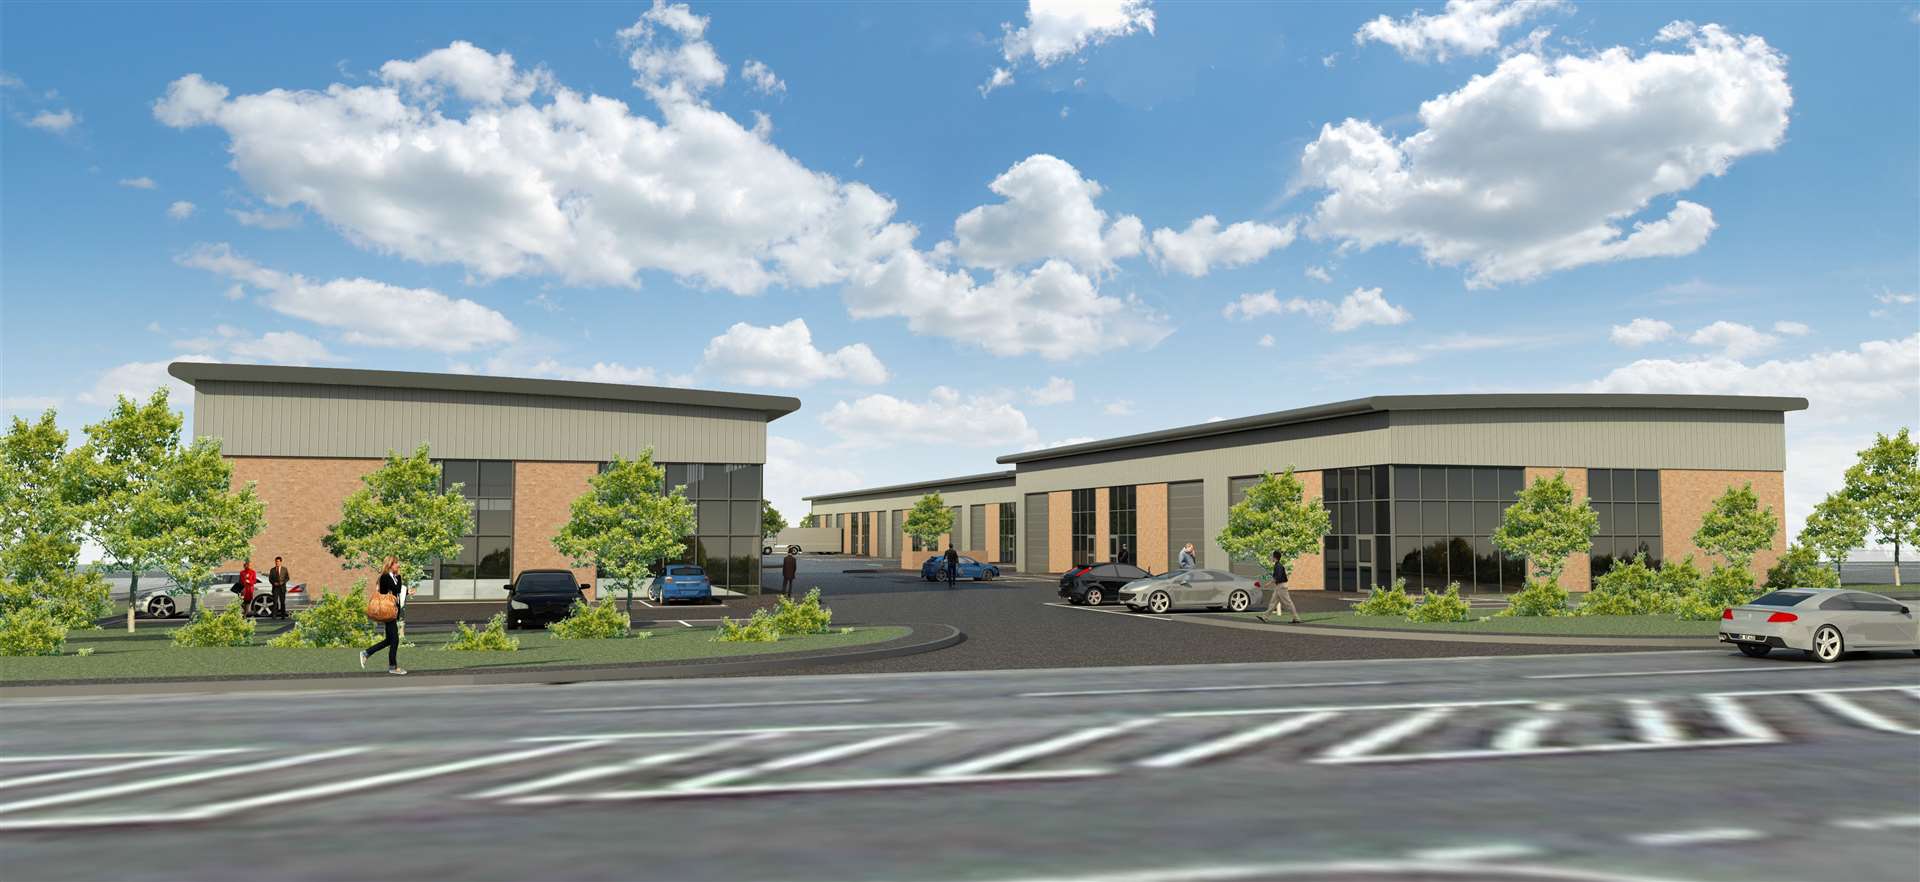 Gallagher Group is about to begin construction of its Nepicar Park commercial premises in Wrotham